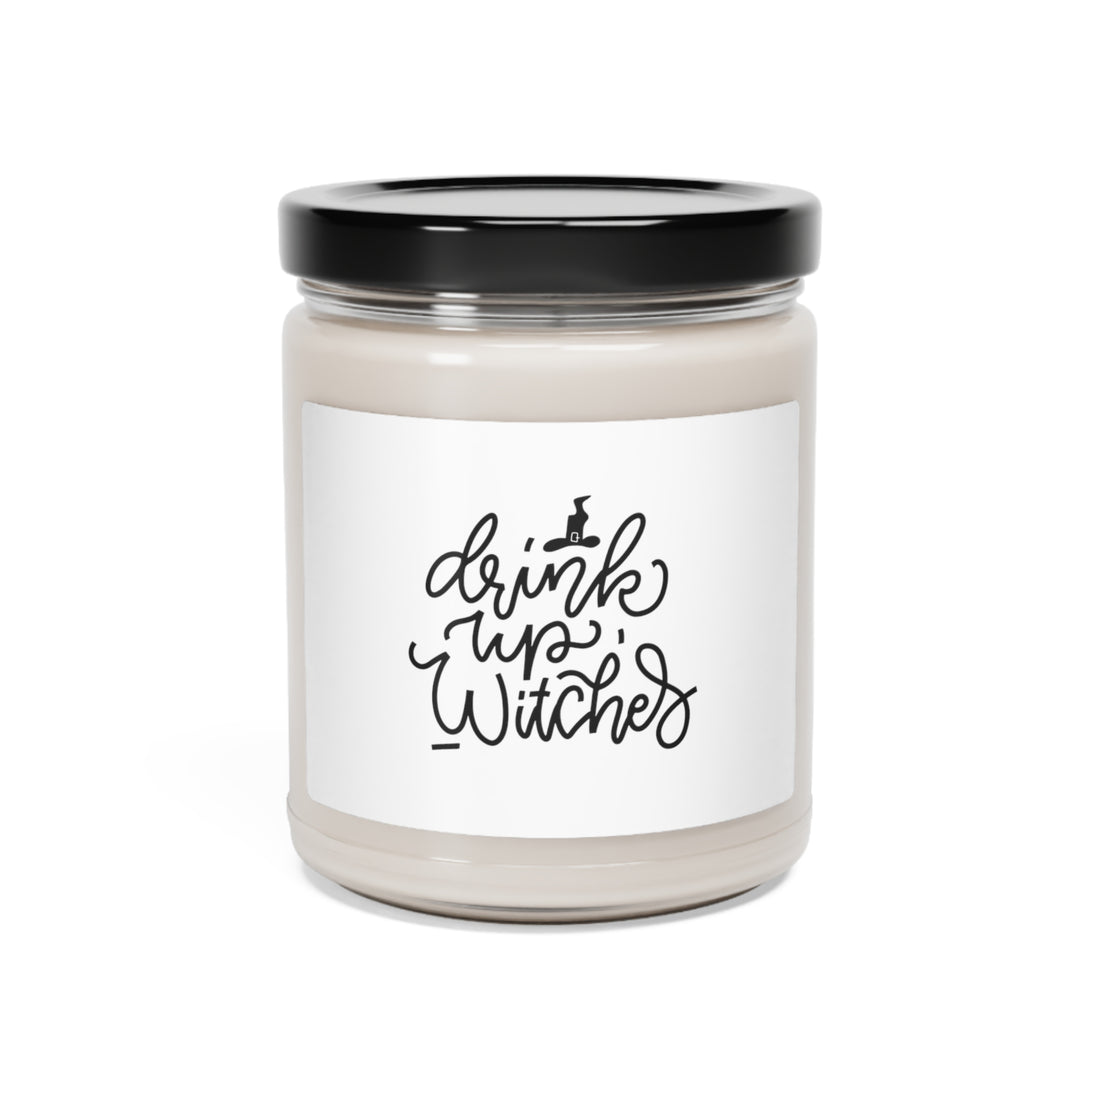 Drink up witches! Halloween Scented Soy Candle, 9oz